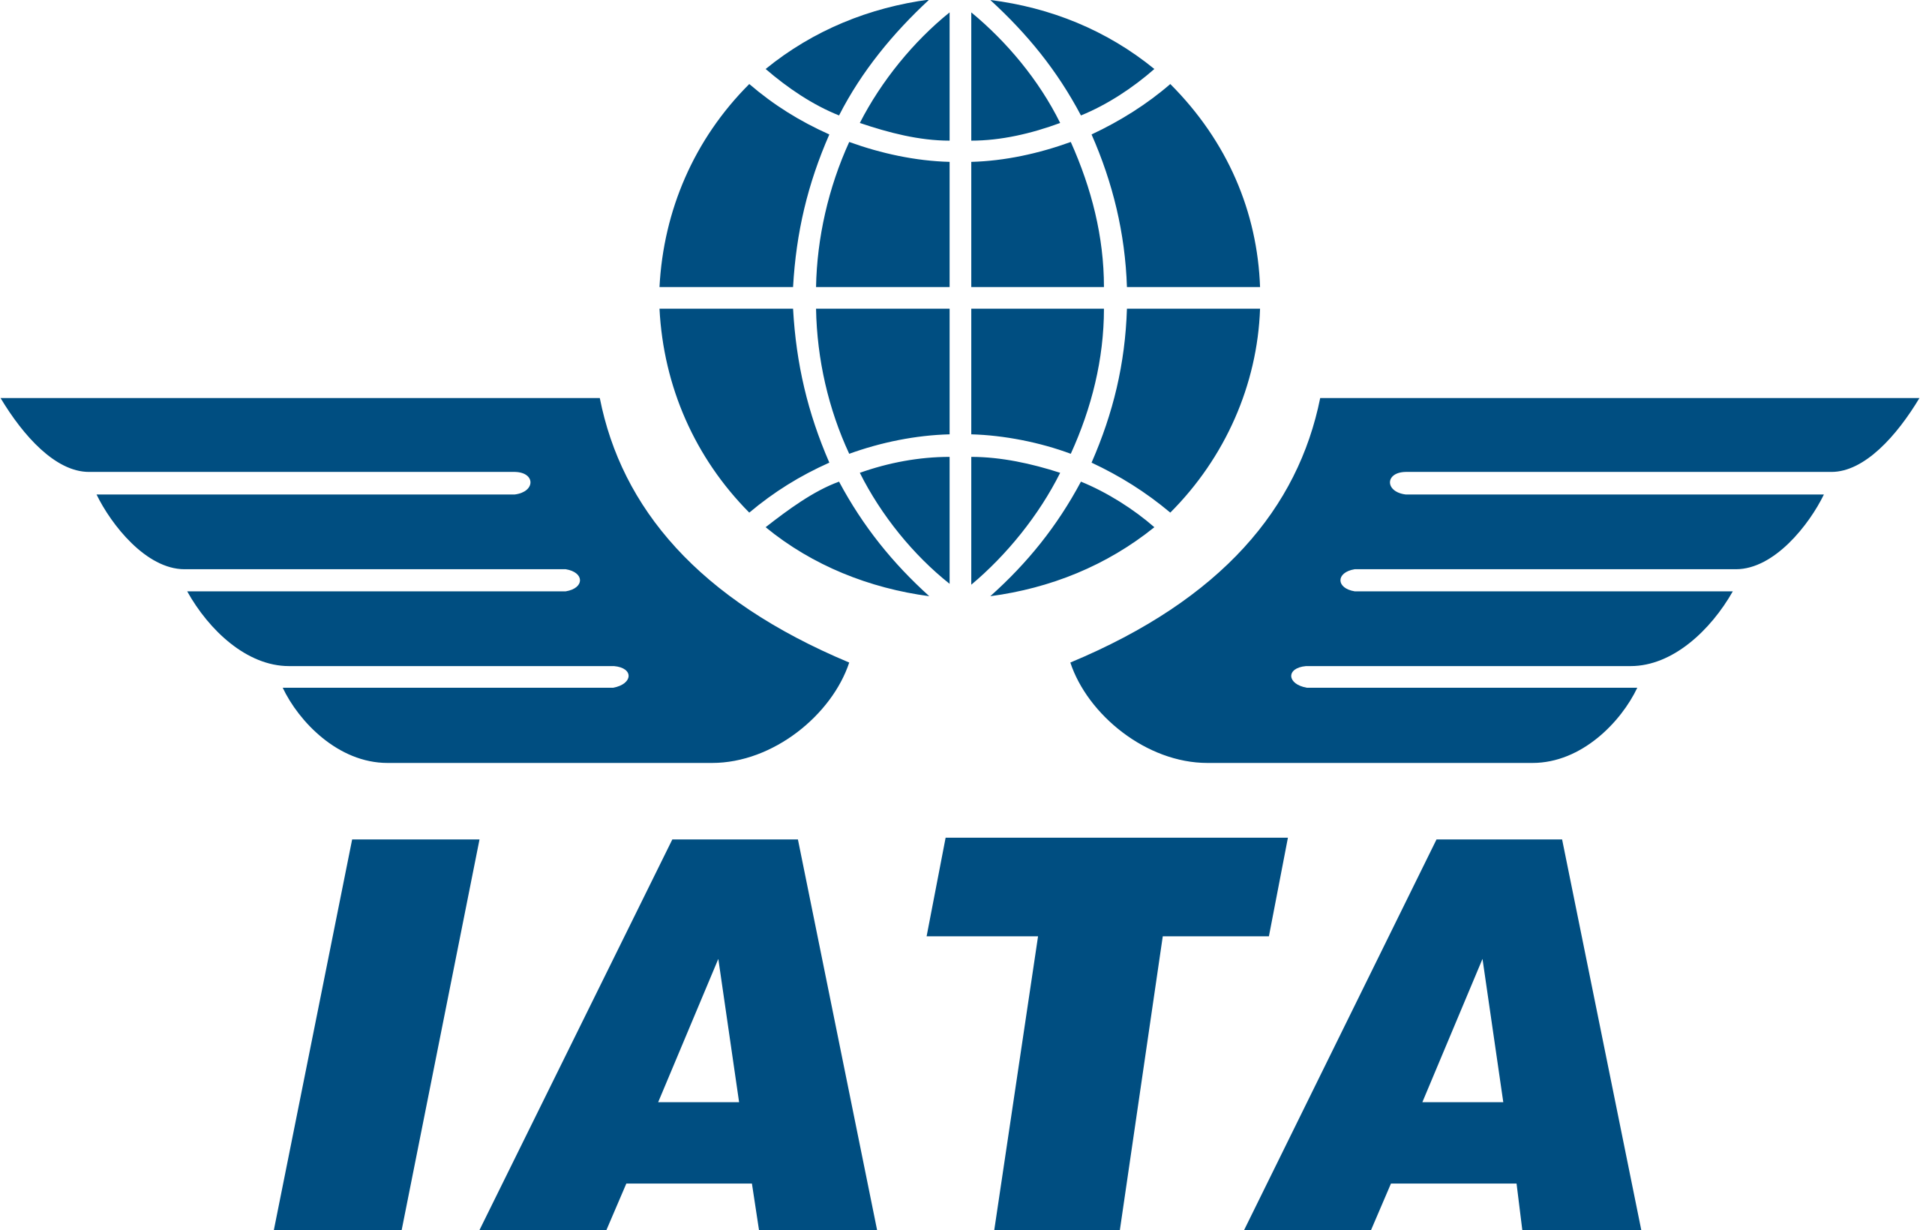 Air Travel Reaches 99% of 2019 Levels as Recovery Continues in November: IATA